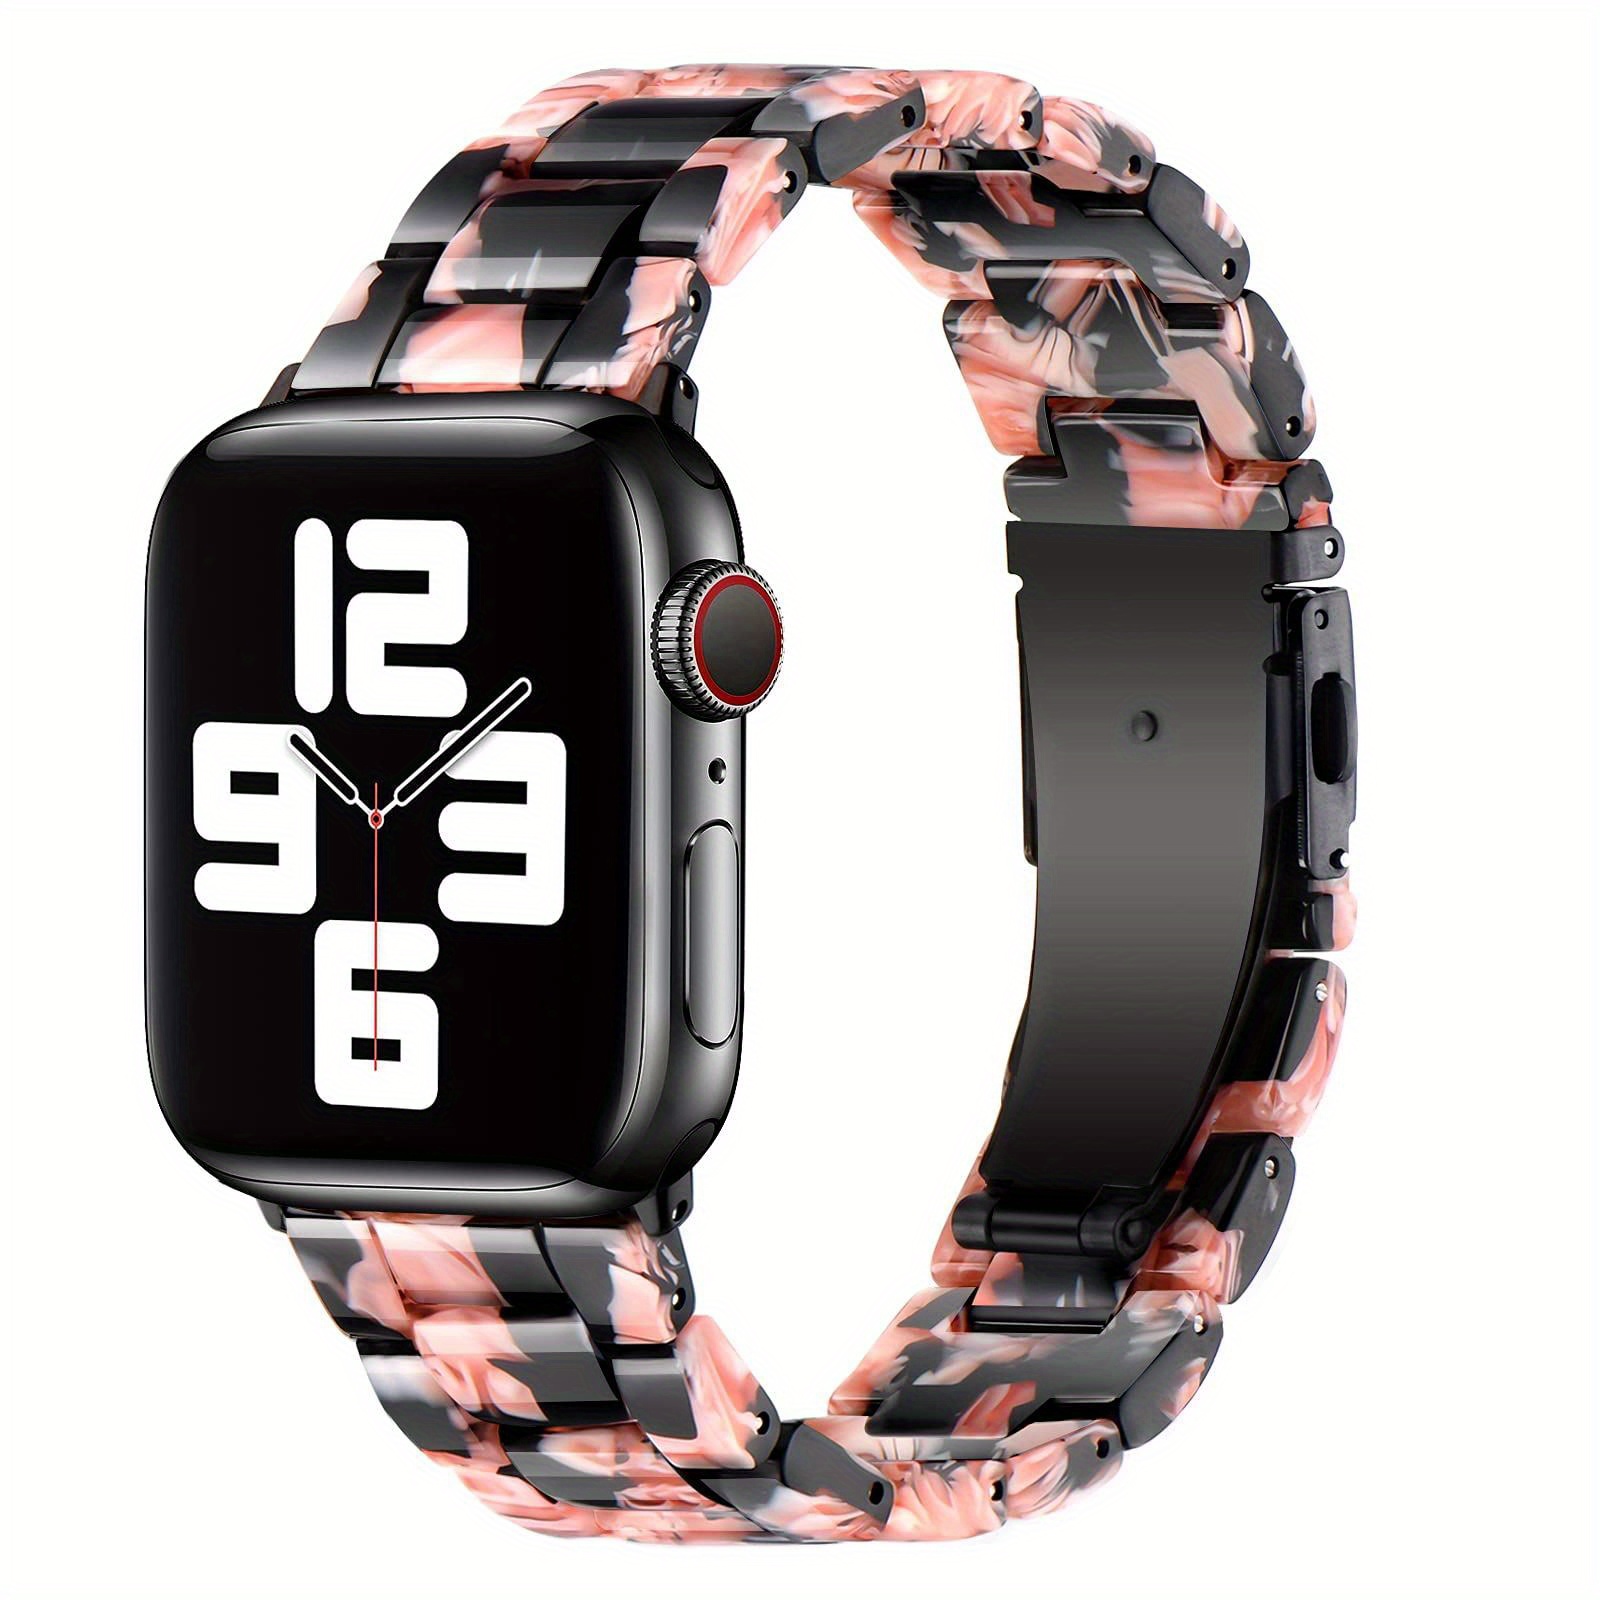 Resin Strap For Apple Watch Band 44mm 40mm 45mm 38mm 42mm 41mm